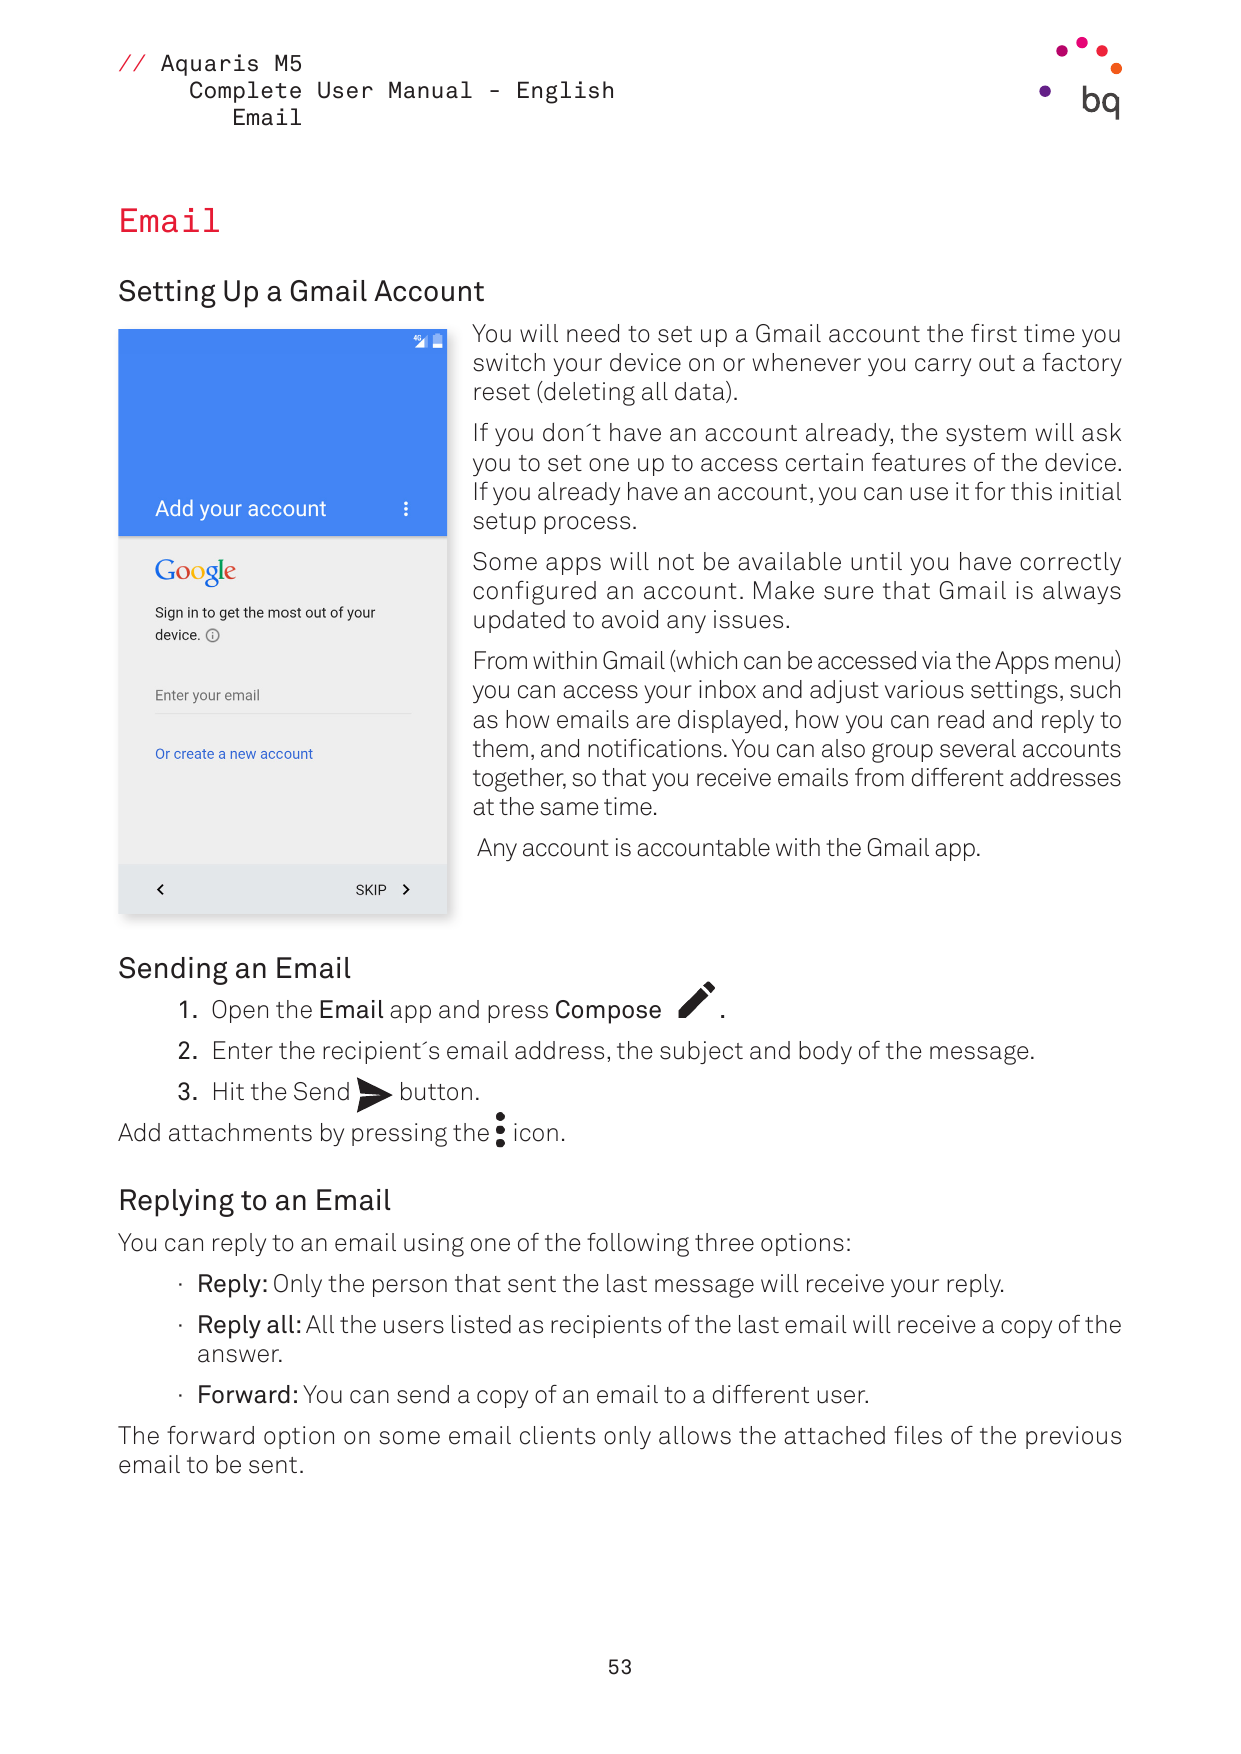 // Aquaris M5Complete User Manual - EnglishEmailEmailSetting Up a Gmail AccountYou will need to set up a Gmail account the first